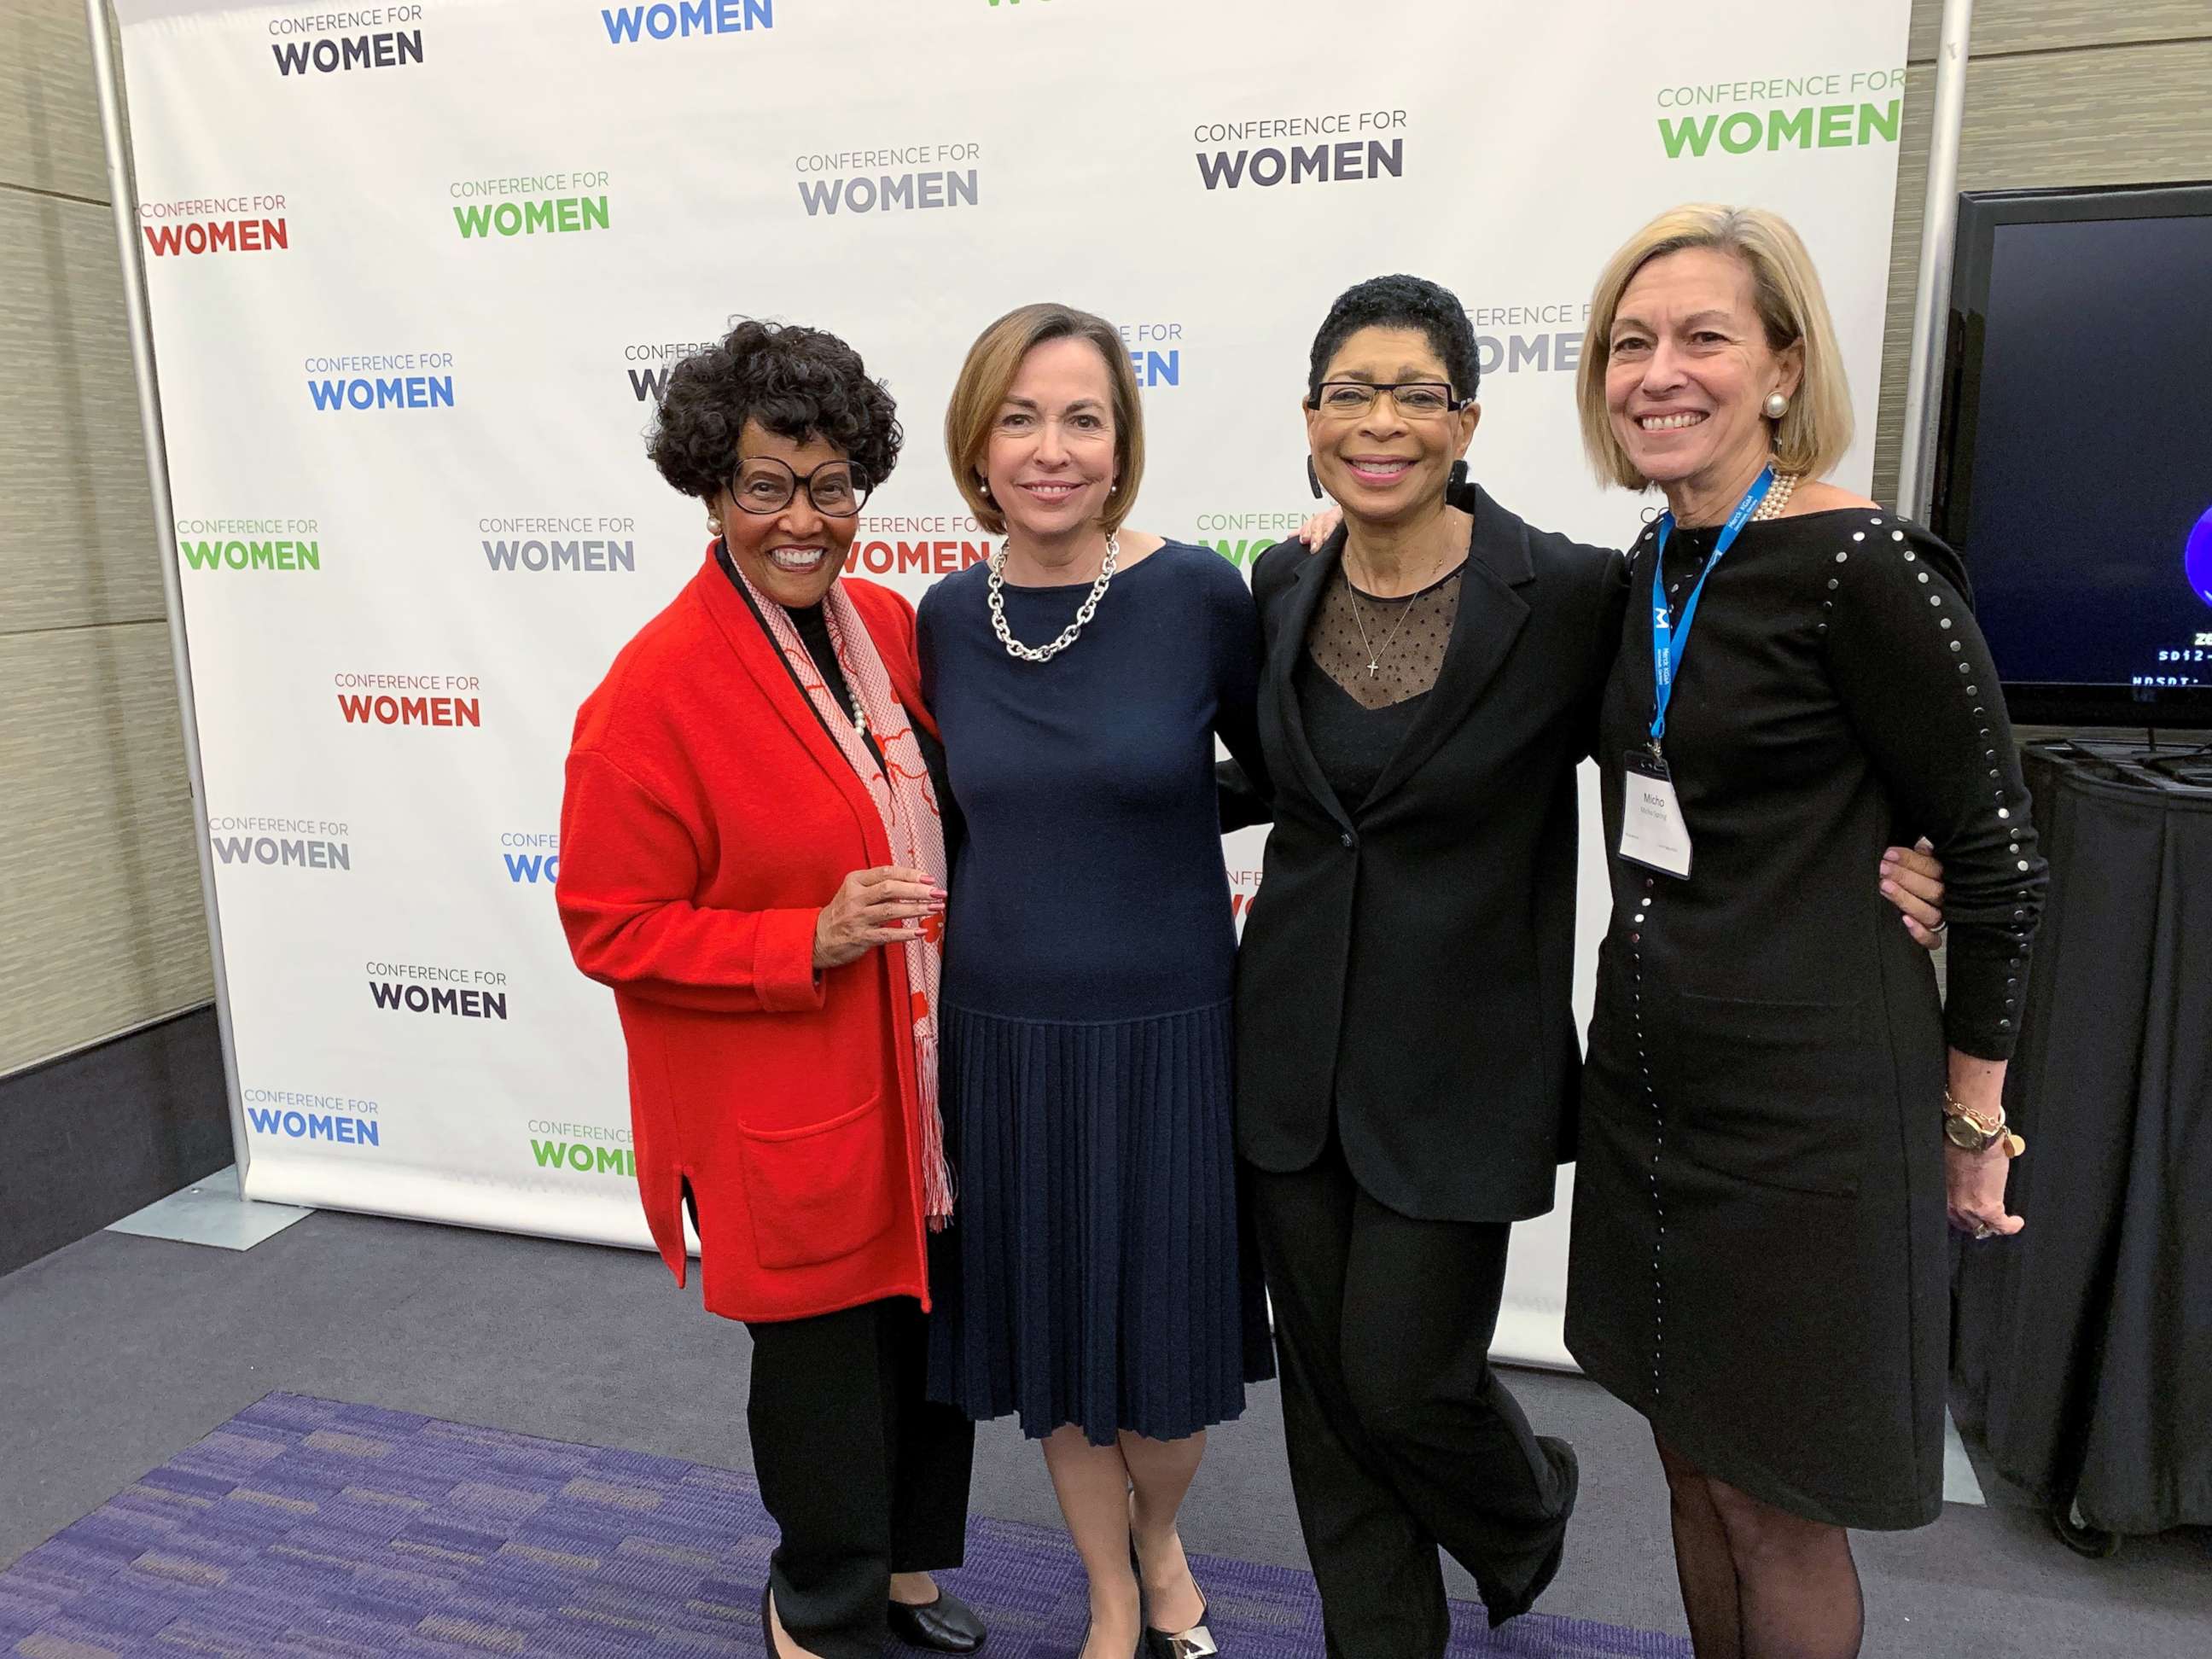 PHOTO: Four female leaders in Boston founded the Massachusetts Conference for Women 14 years ago. Pictured: Marian L. Heard, Gloria Cordes Larson,  Carol Fulp and Micho Spring.